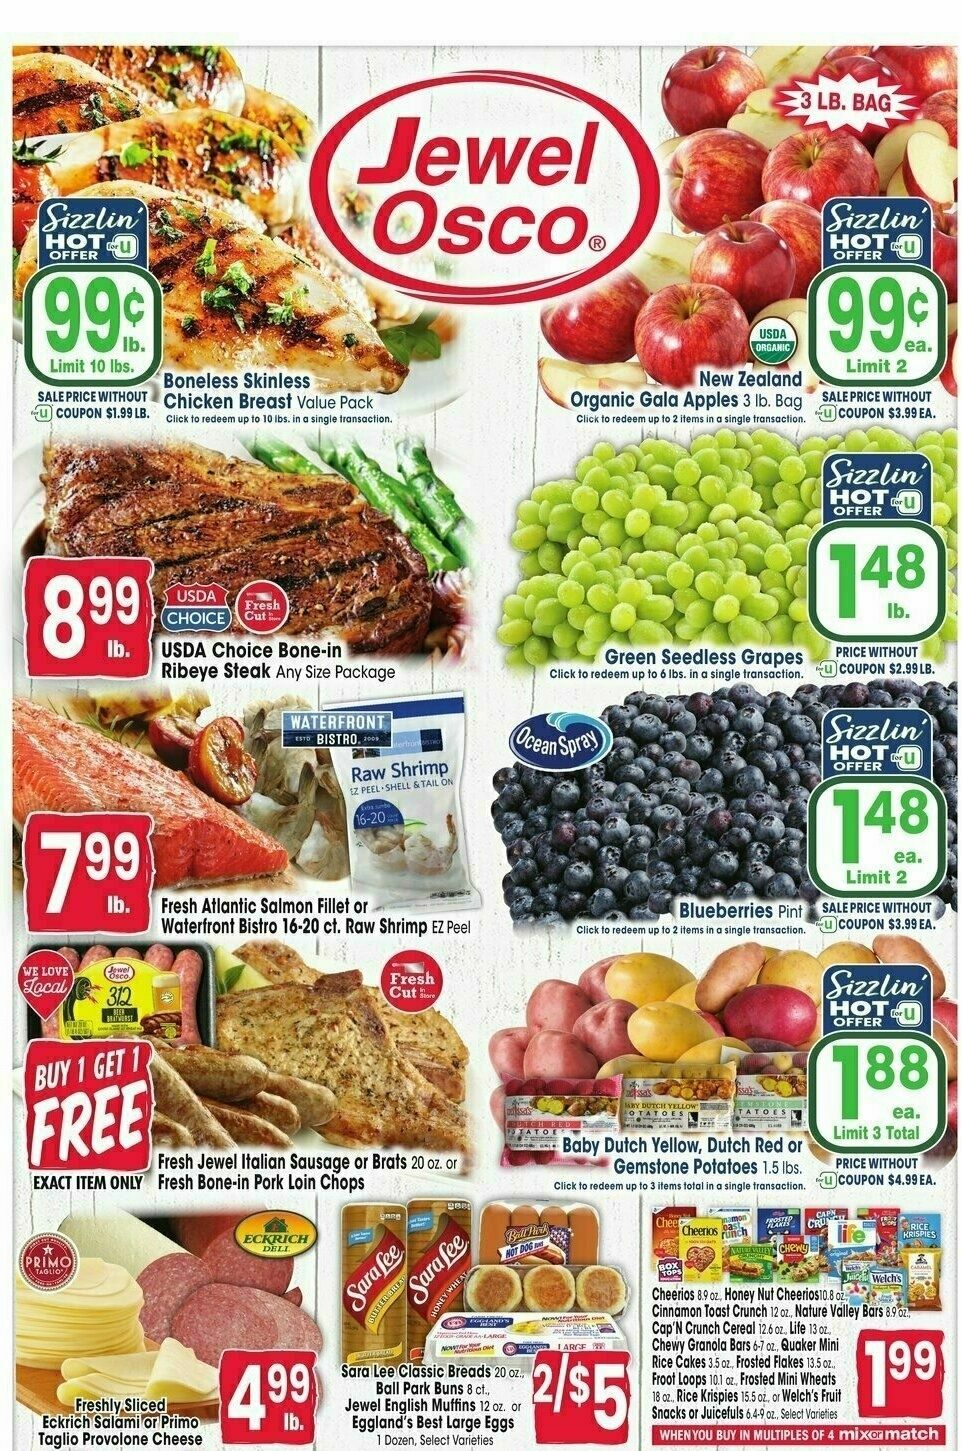 Jewel Osco Weekly Ad from August 23